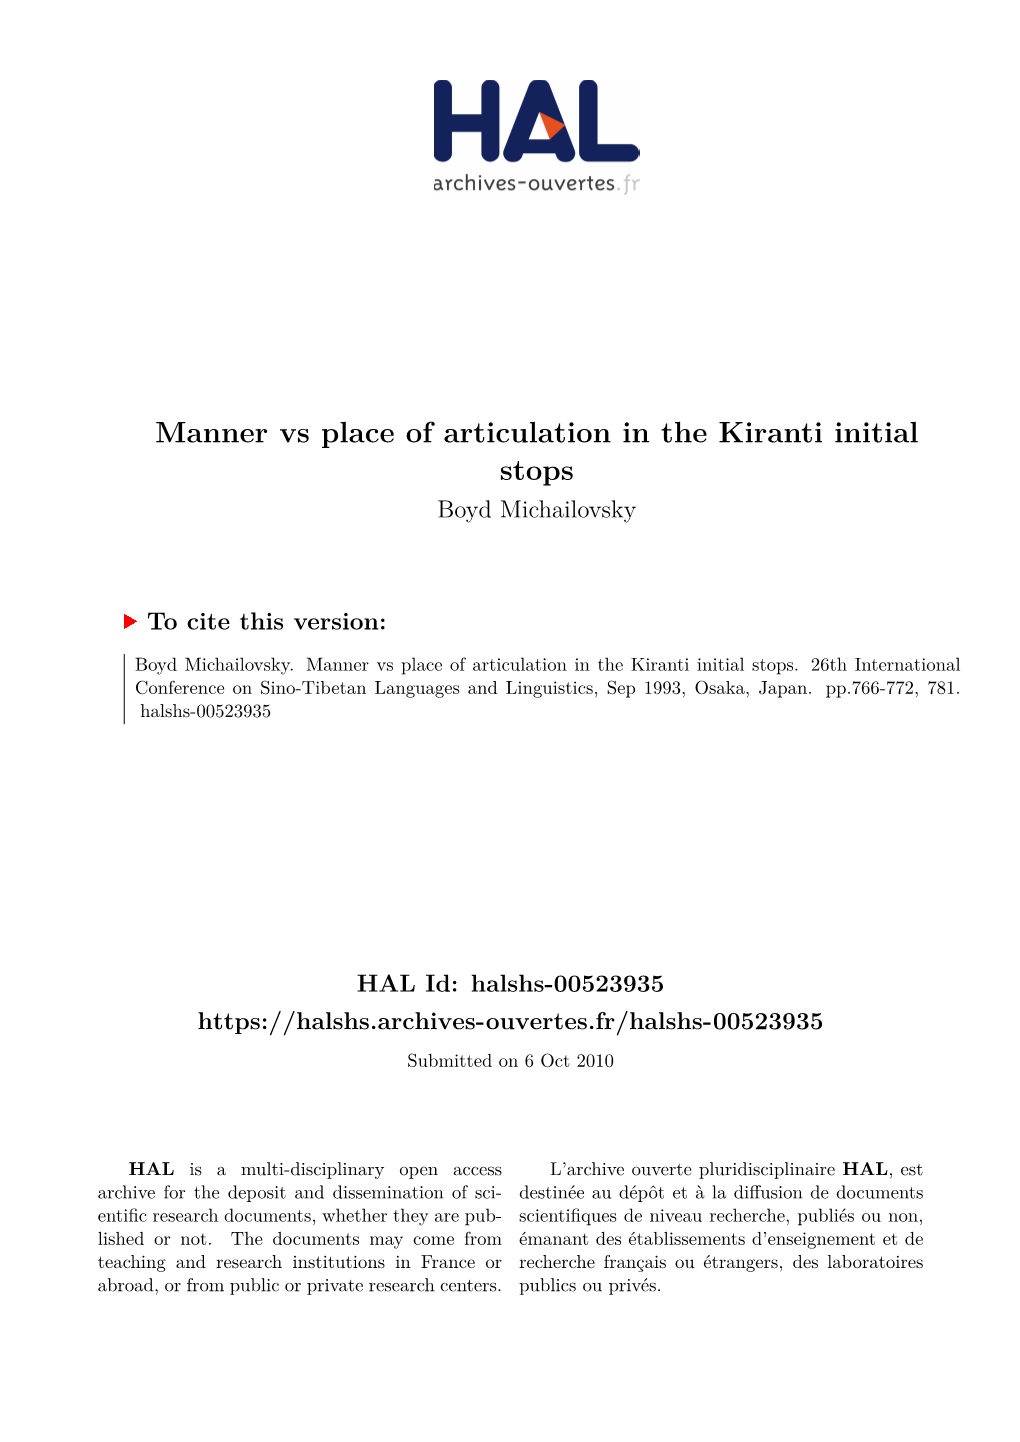 Manner Vs Place of Articulation in the Kiranti Initial Stops Boyd Michailovsky